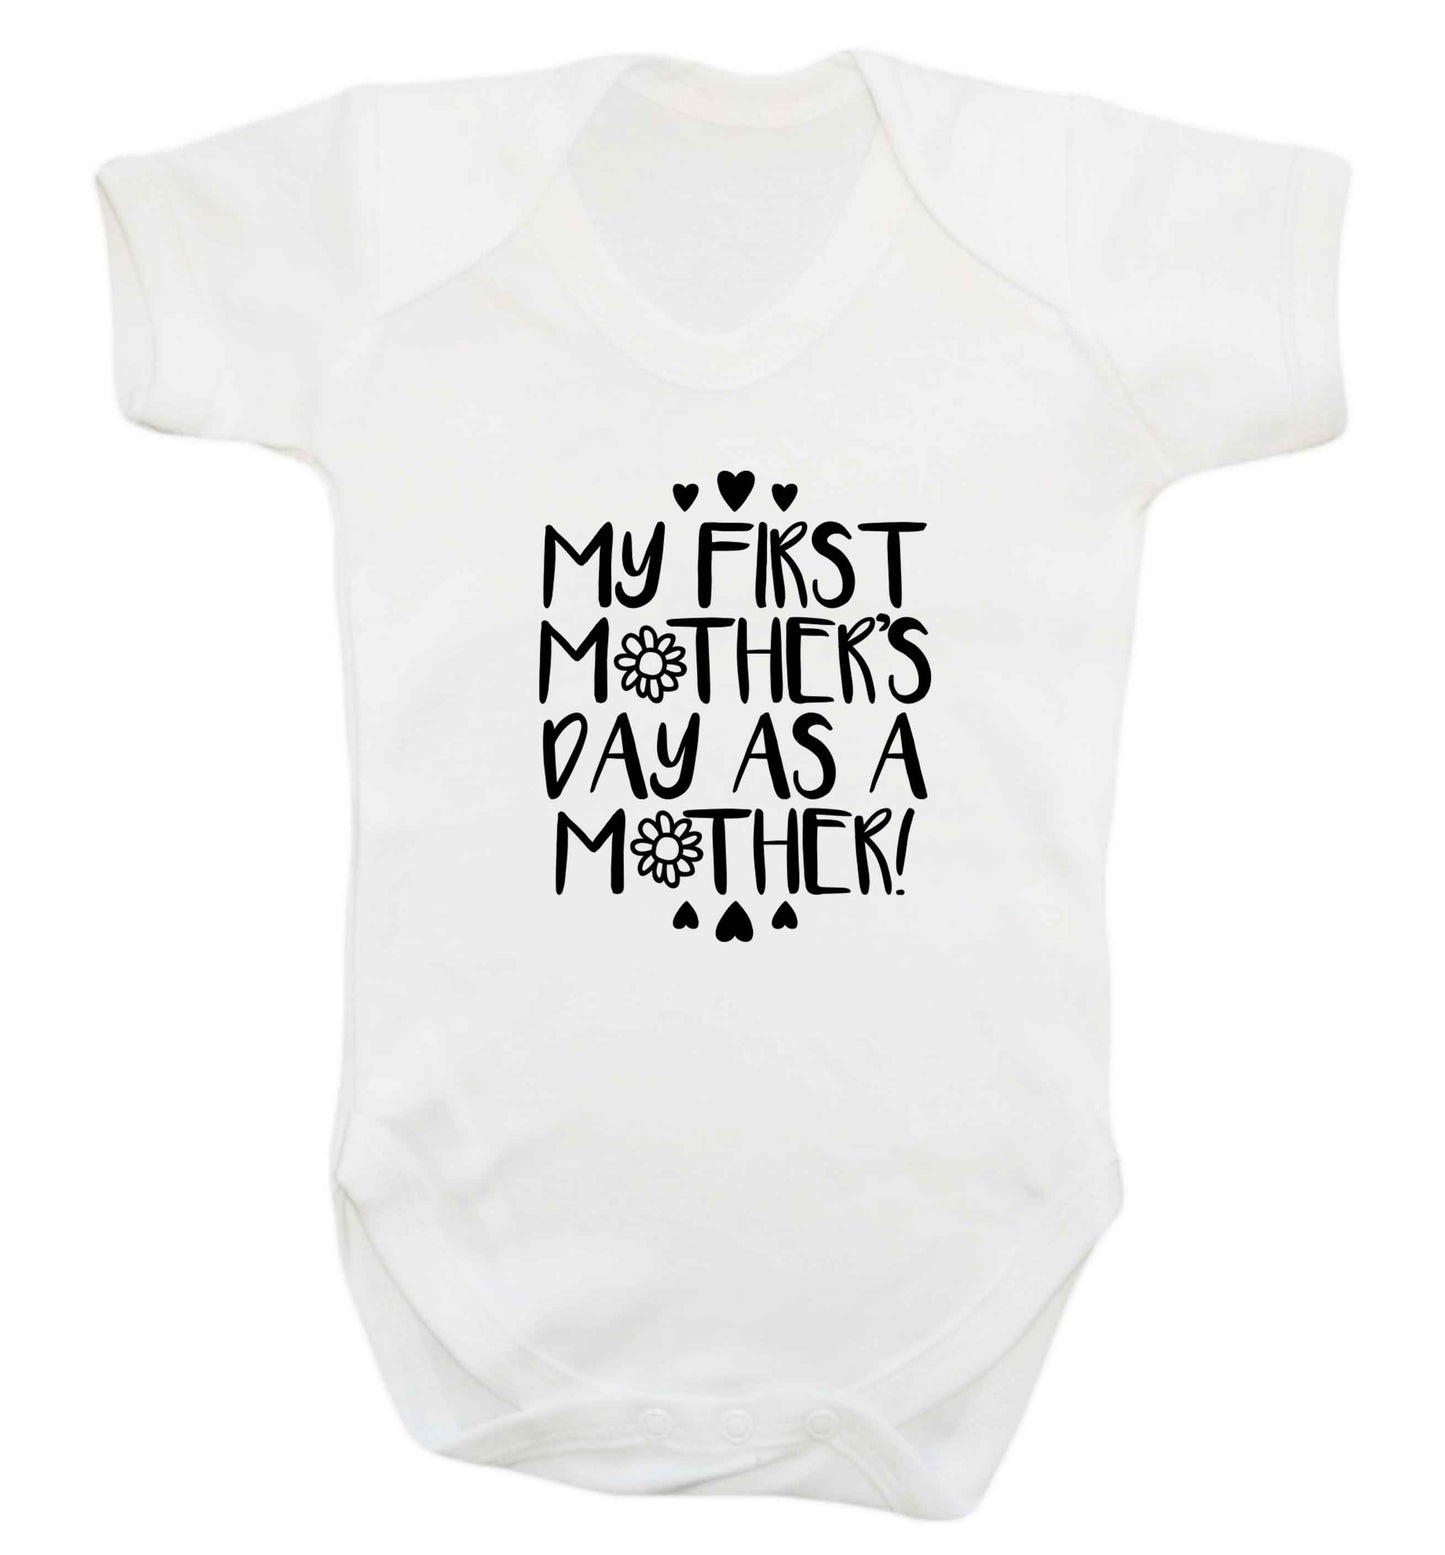 It's my first mother's day as a mother baby vest white 18-24 months